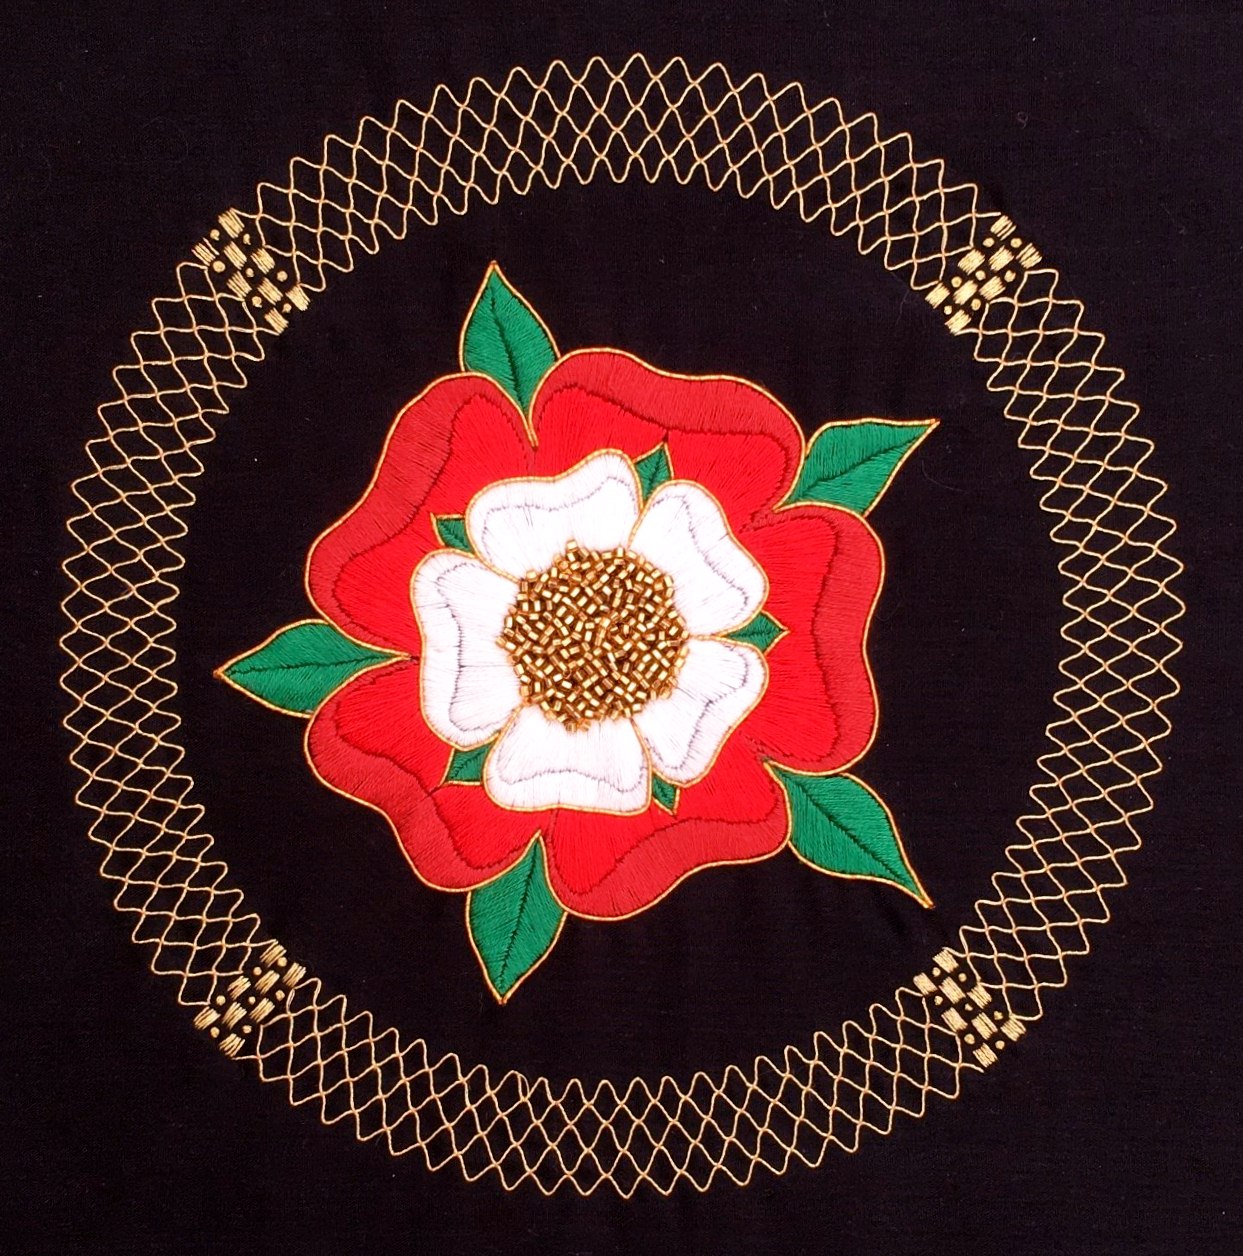 DOUBLE TUDOR ROSE by Michele King, hand embroidery with crewel work and mixed media, MEG display at NW Regional Day 2021